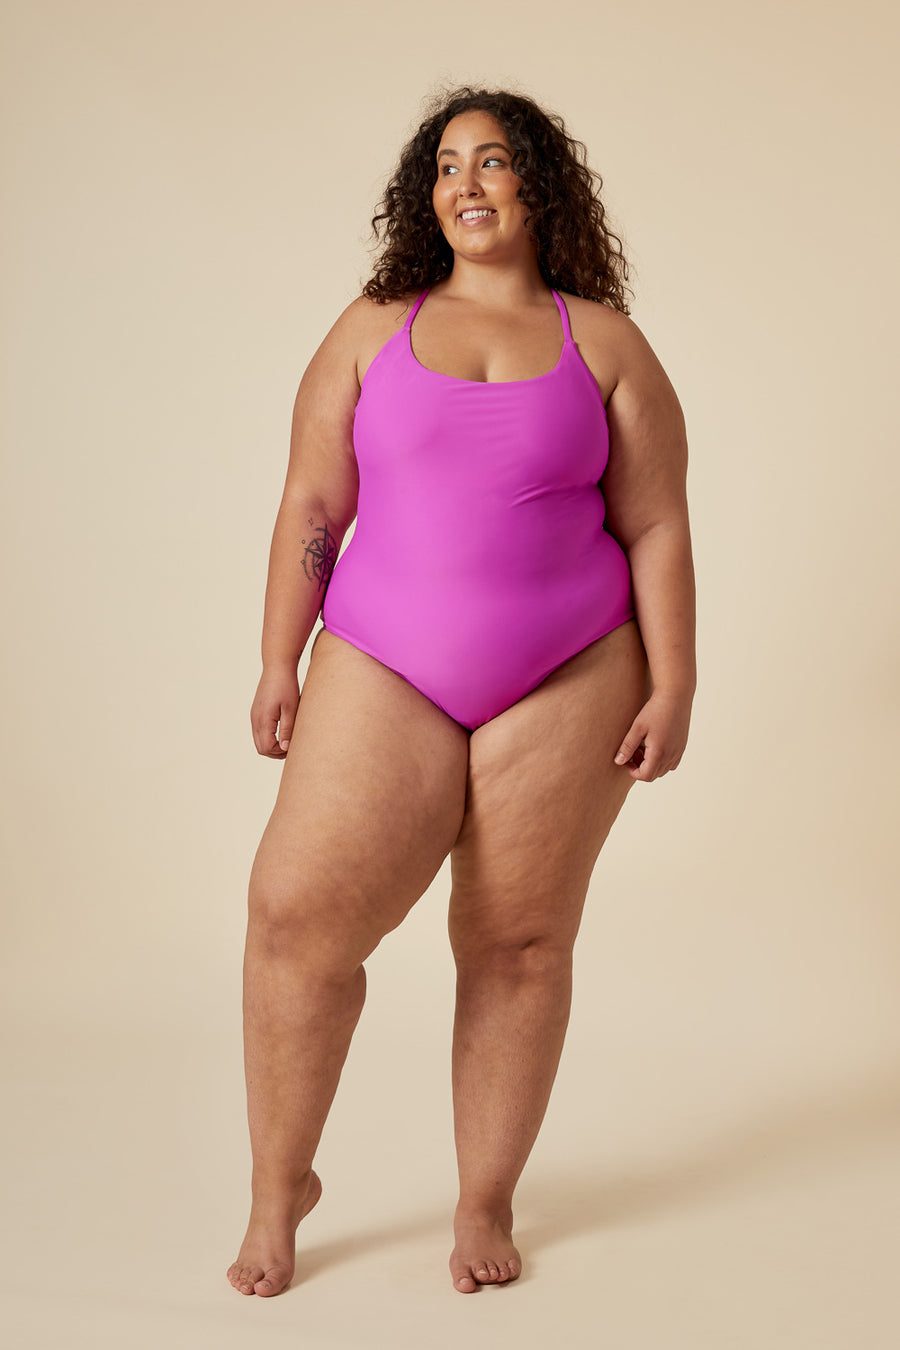 Guide to Measuring Yourself for Plus Size Swimsuits